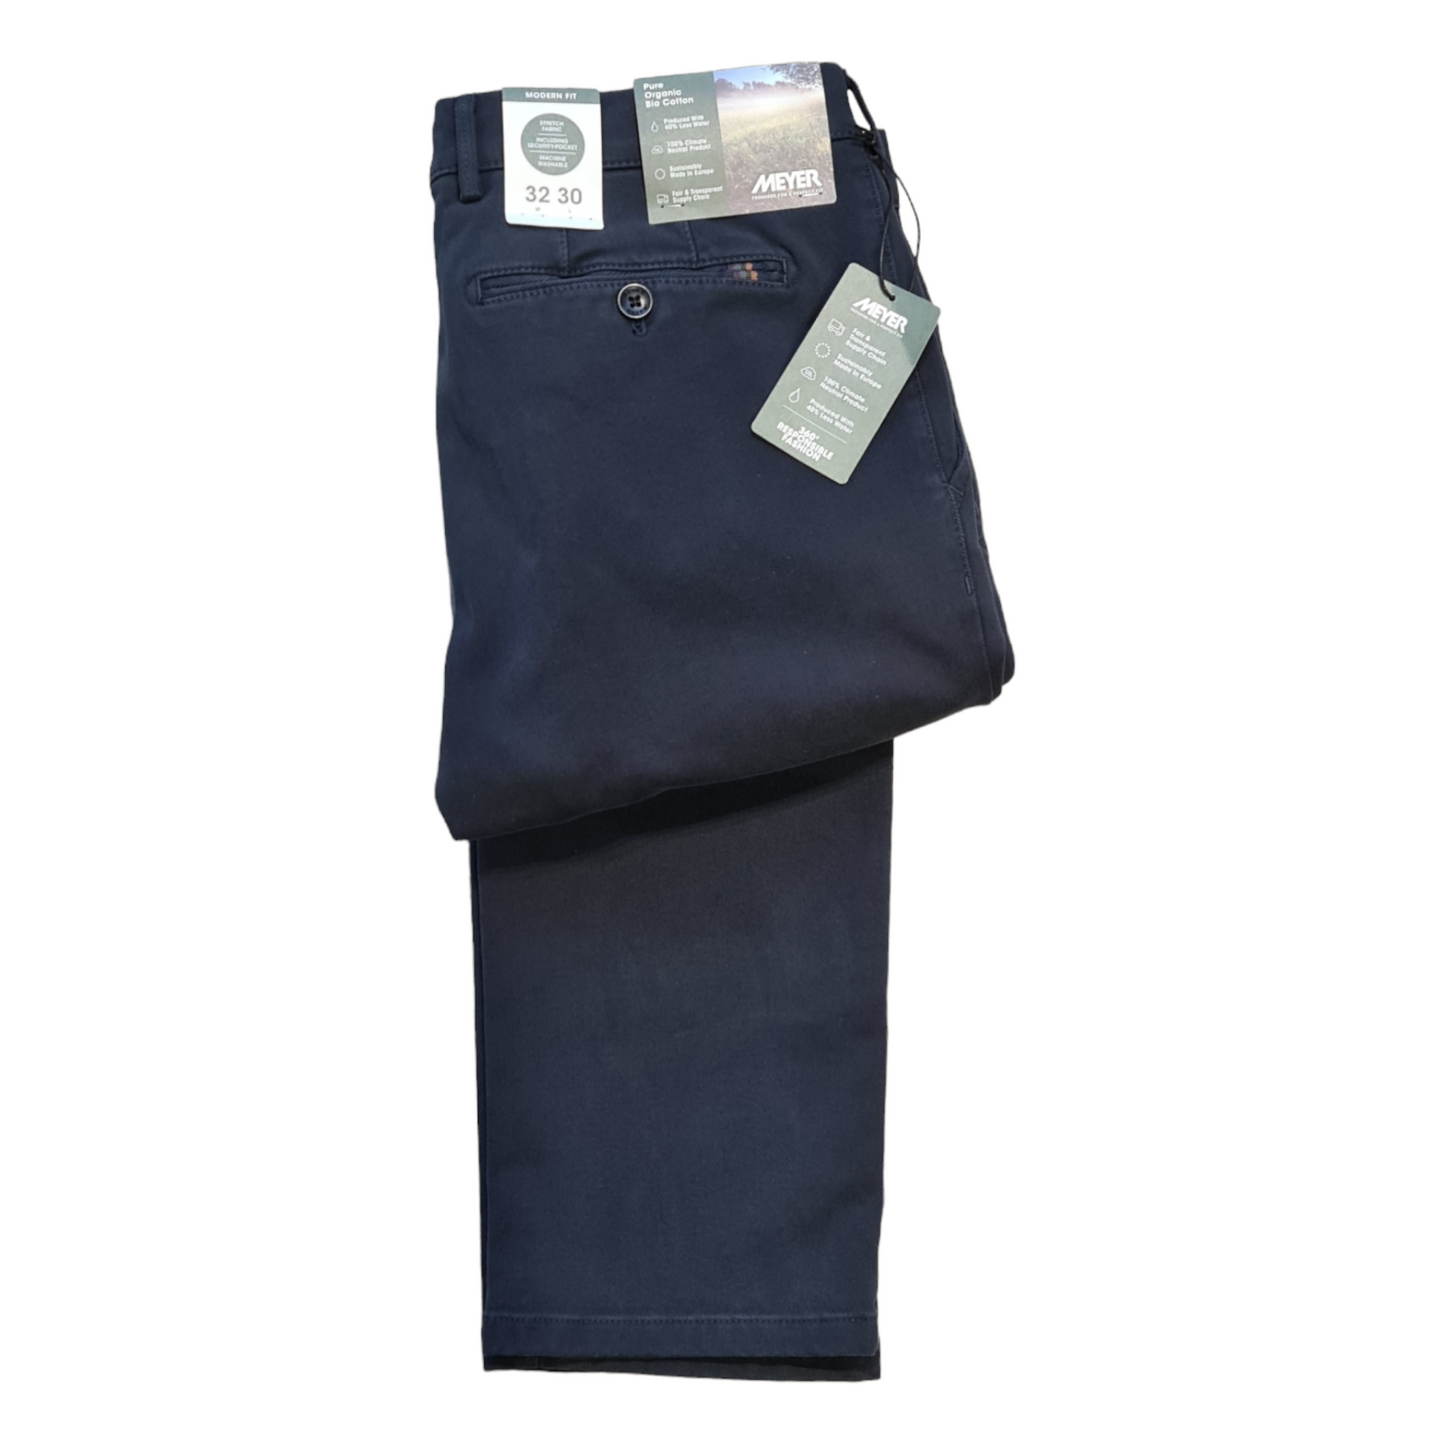 Meyer 3521 16 Rio Blue Trousers